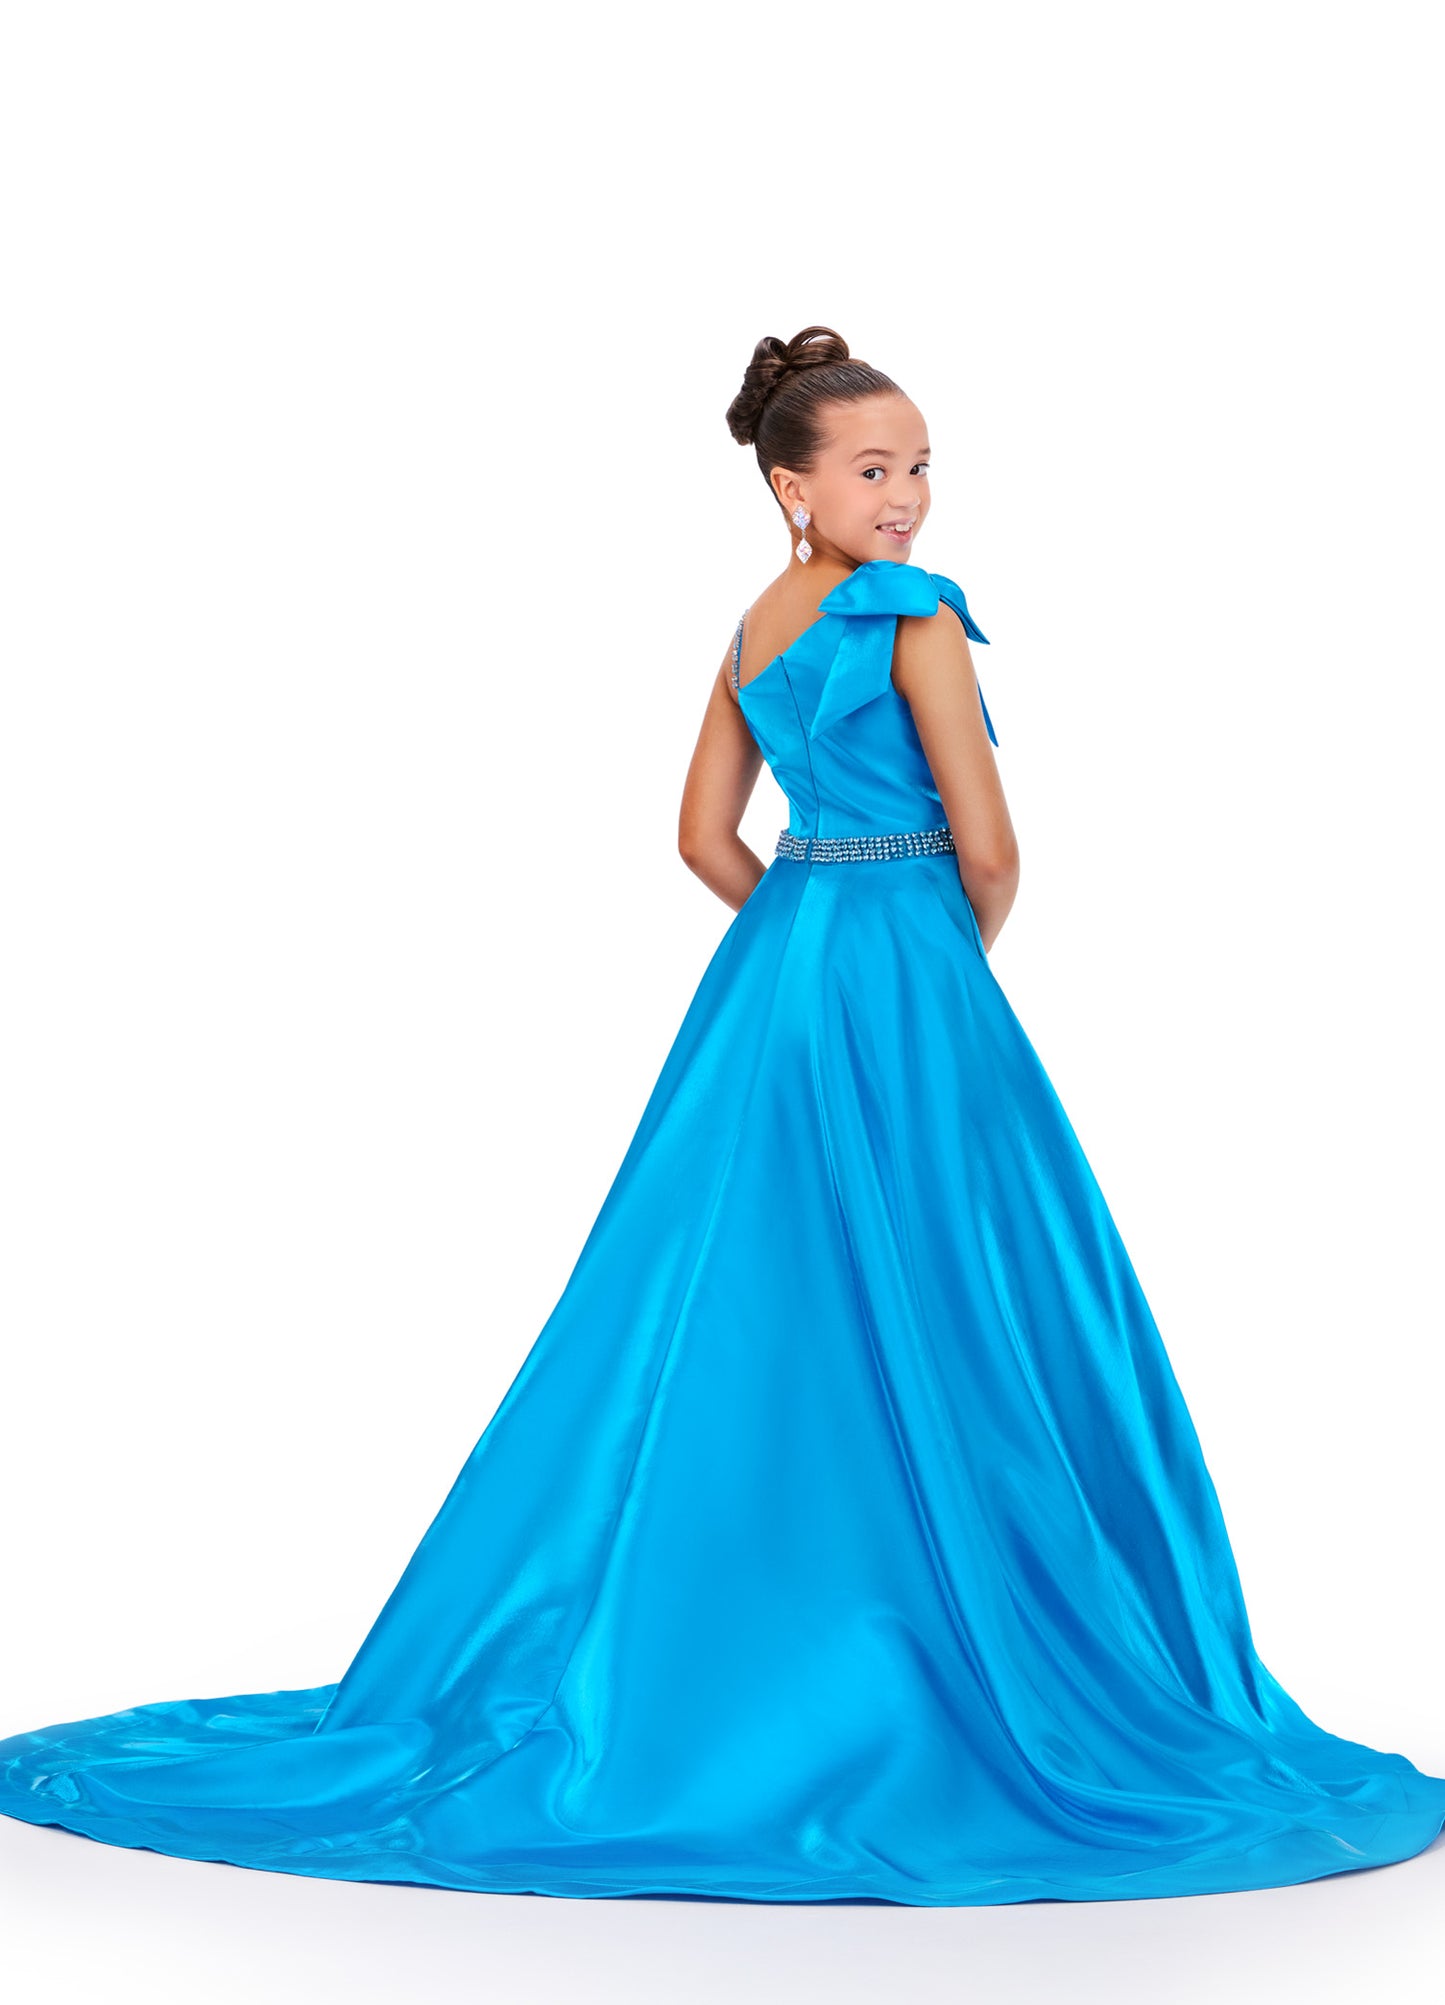 Expertly crafted for the pageant stage, the Ashley Lauren Kids 8248 dress is designed with a shimmering satin fabric and a unique one-shoulder bow for a touch of elegance. Its A-line silhouette flatters any figure while making a stunning statement. Perfect for a winning performance. This beautiful satin gown features a one shoulder neckline with bow. The look is complete with a rhinestone belt and full skirt.